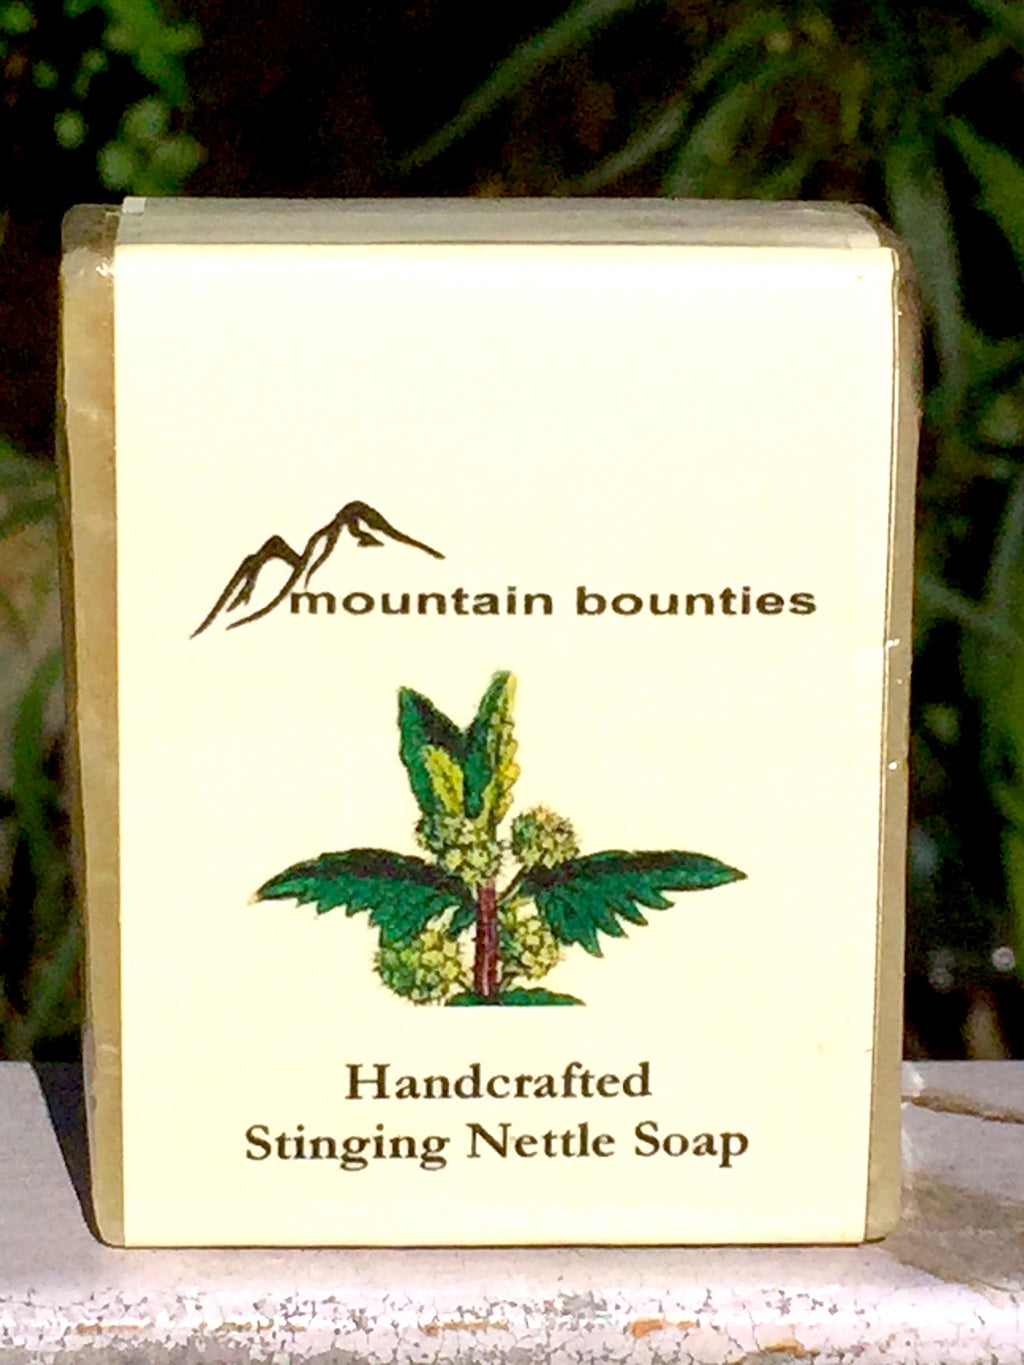 Handcrafted Stinging Nettle Soap